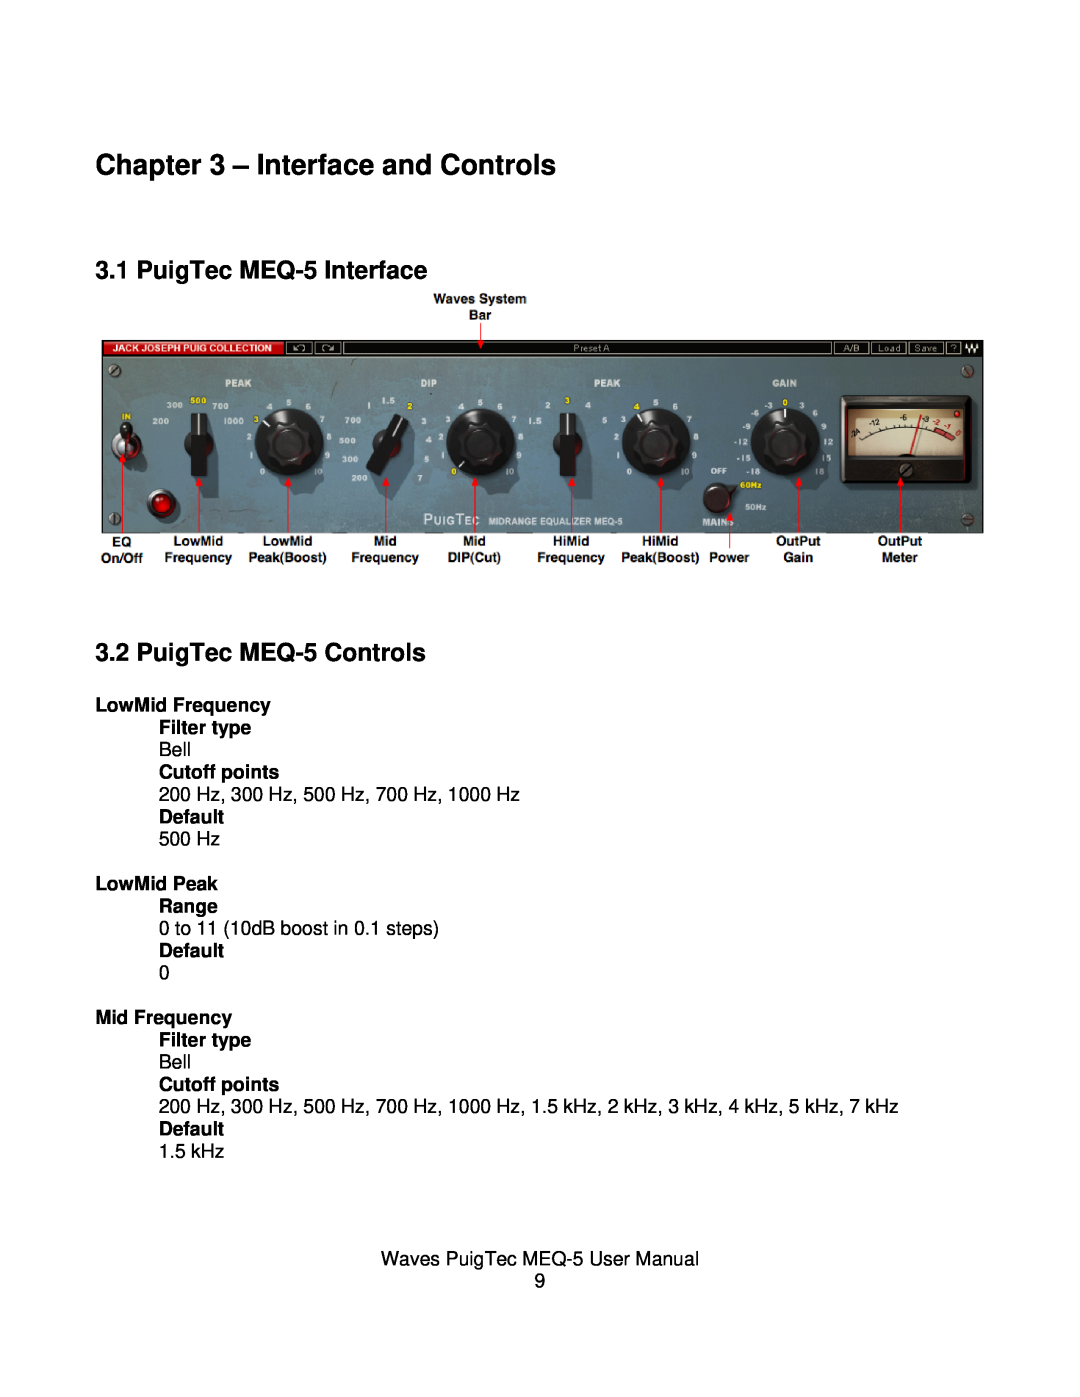 Waves user manual Interface and Controls, PuigTec MEQ-5Interface, PuigTec MEQ-5Controls 